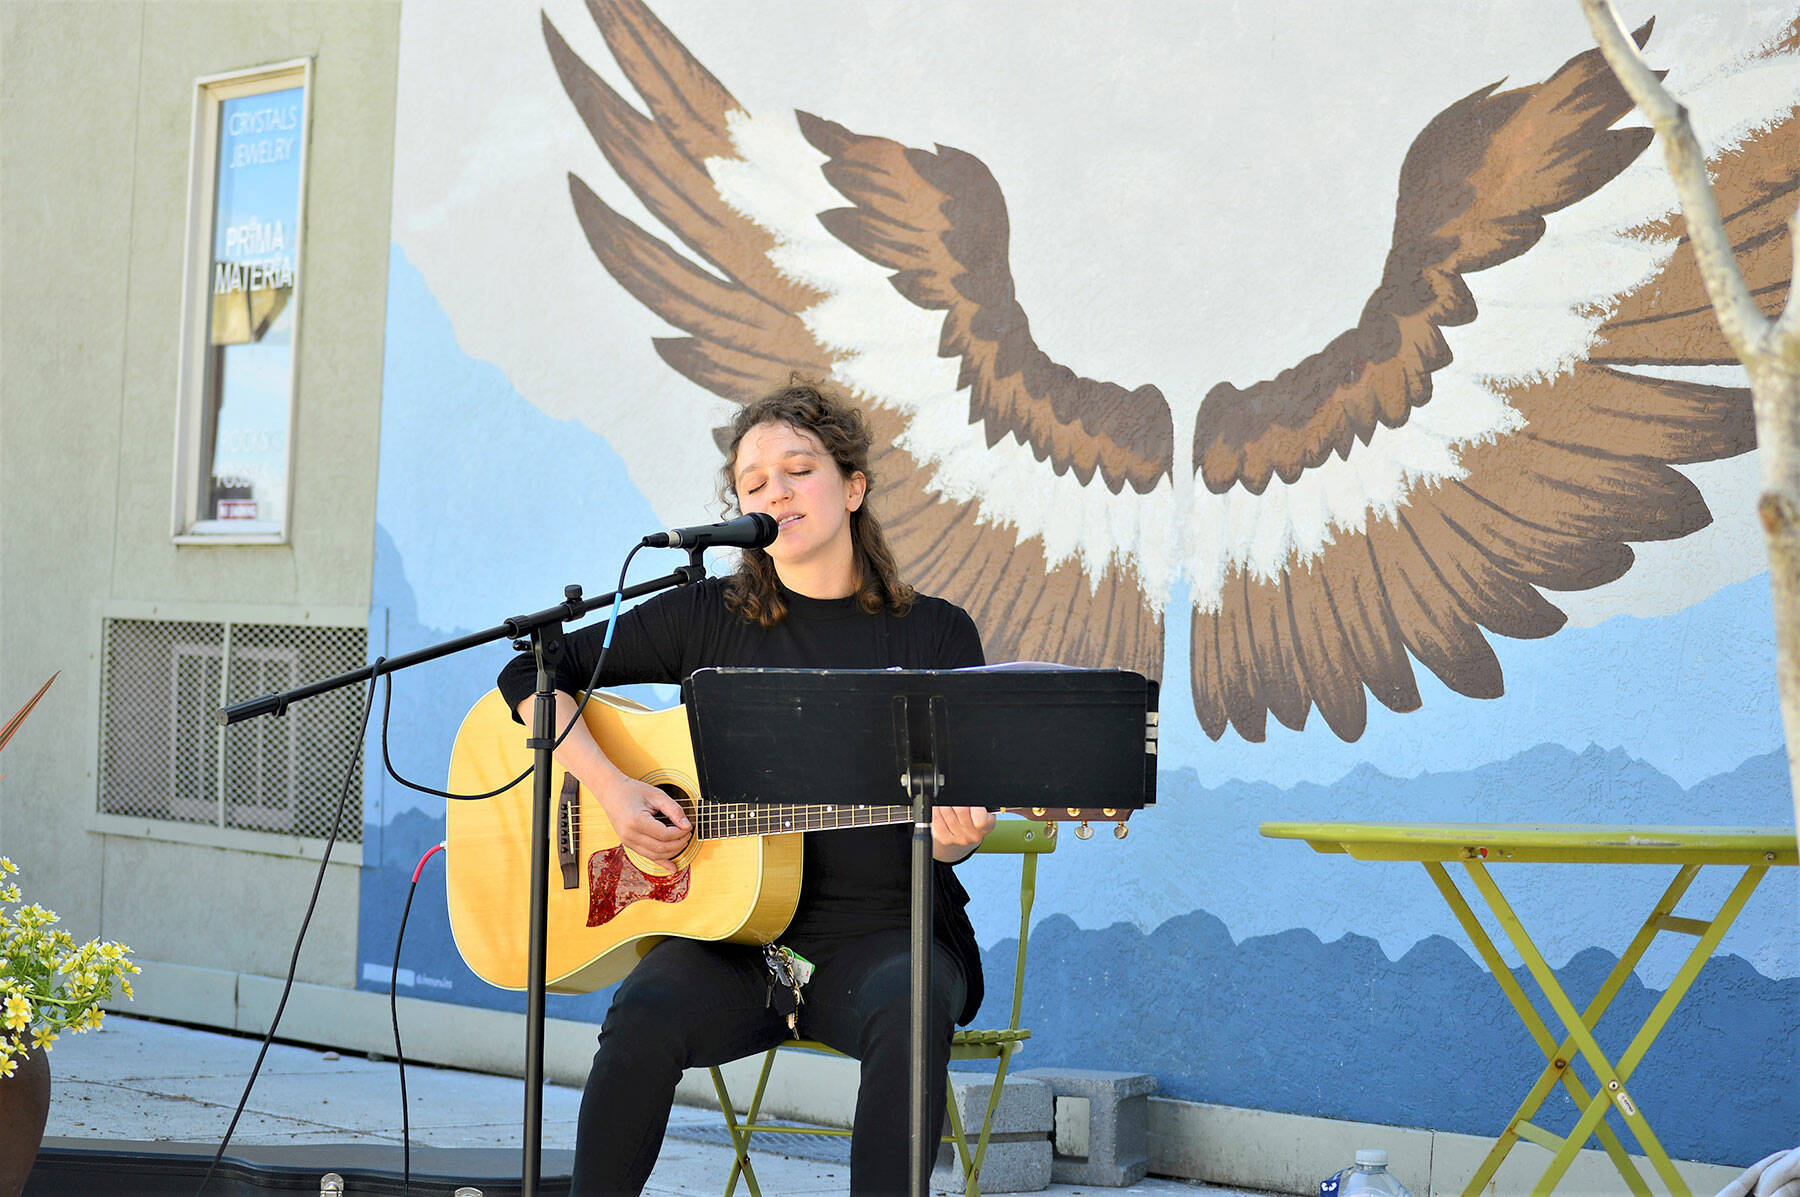 Phina Pipia of Port Townsend, pictured in spring 2021, is one of the multi-instrumentalists returning to the Buskers on the Block series of free performances this month and next. Tyler Street Plaza in downtown Port Townsend, with Nora Kingsley’s wings mural, is the setting. (Diane Urbani de la Paz/Peninsula Daily News)